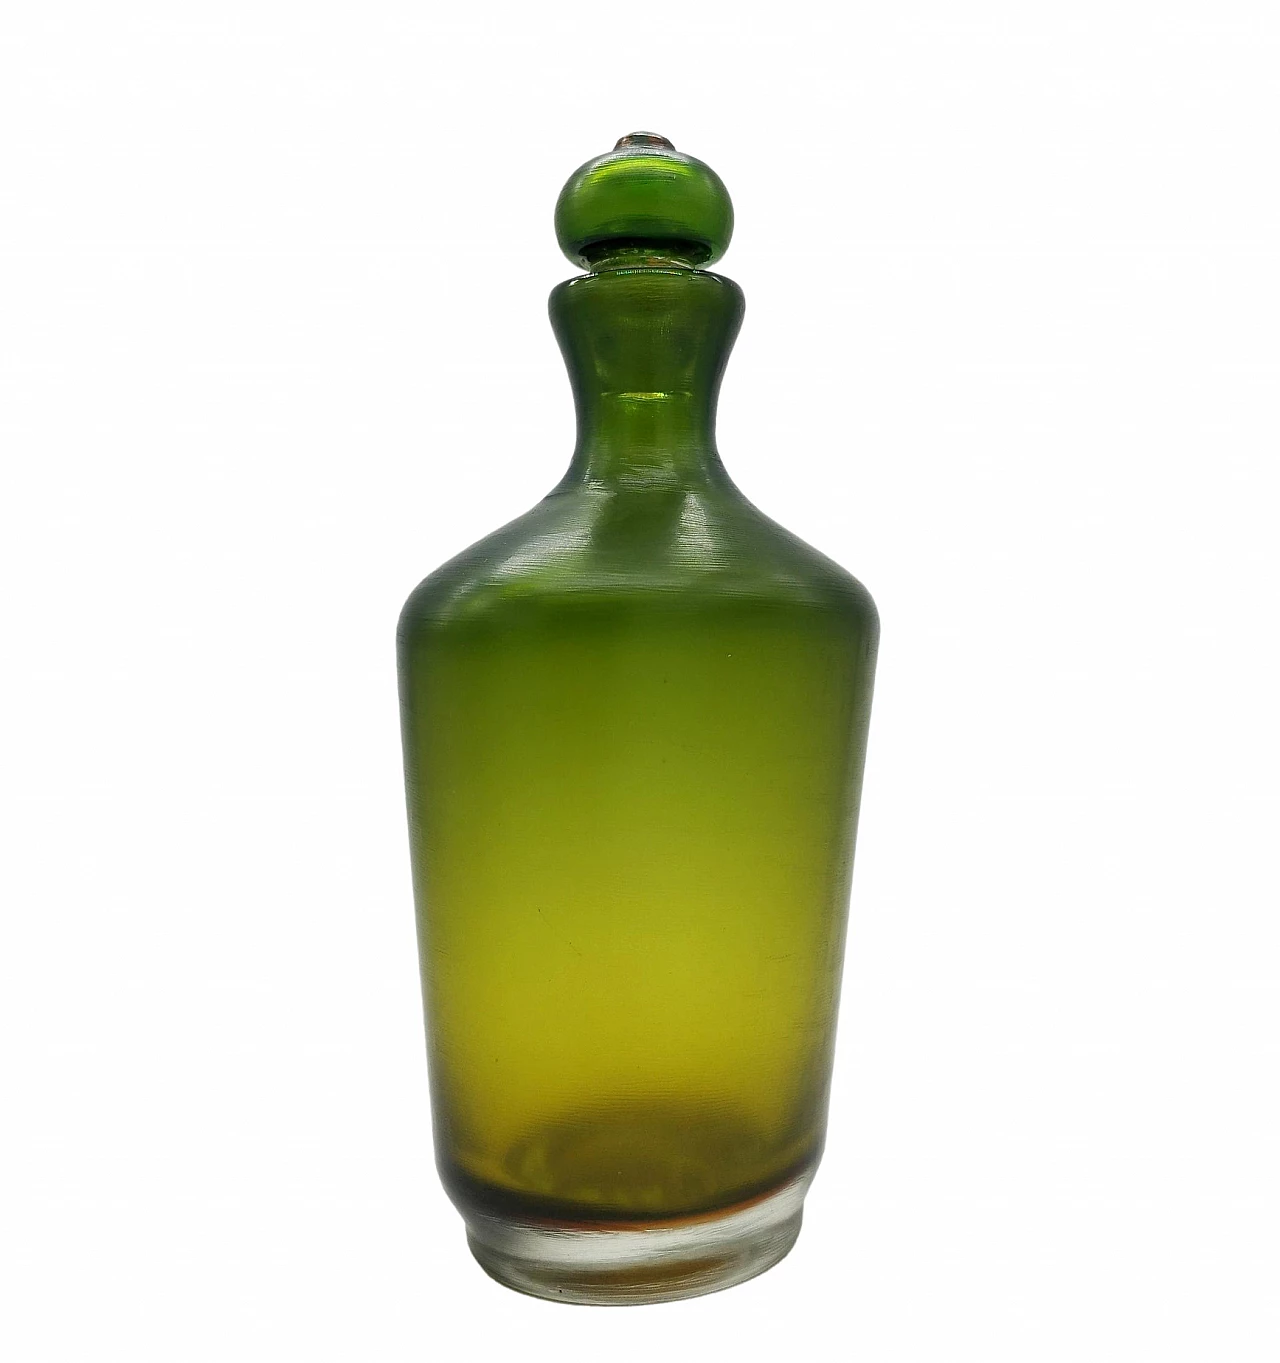 Green Murano glass bottle with stopper from the Bottiglie Incise series by Paolo Venini, 1985 7